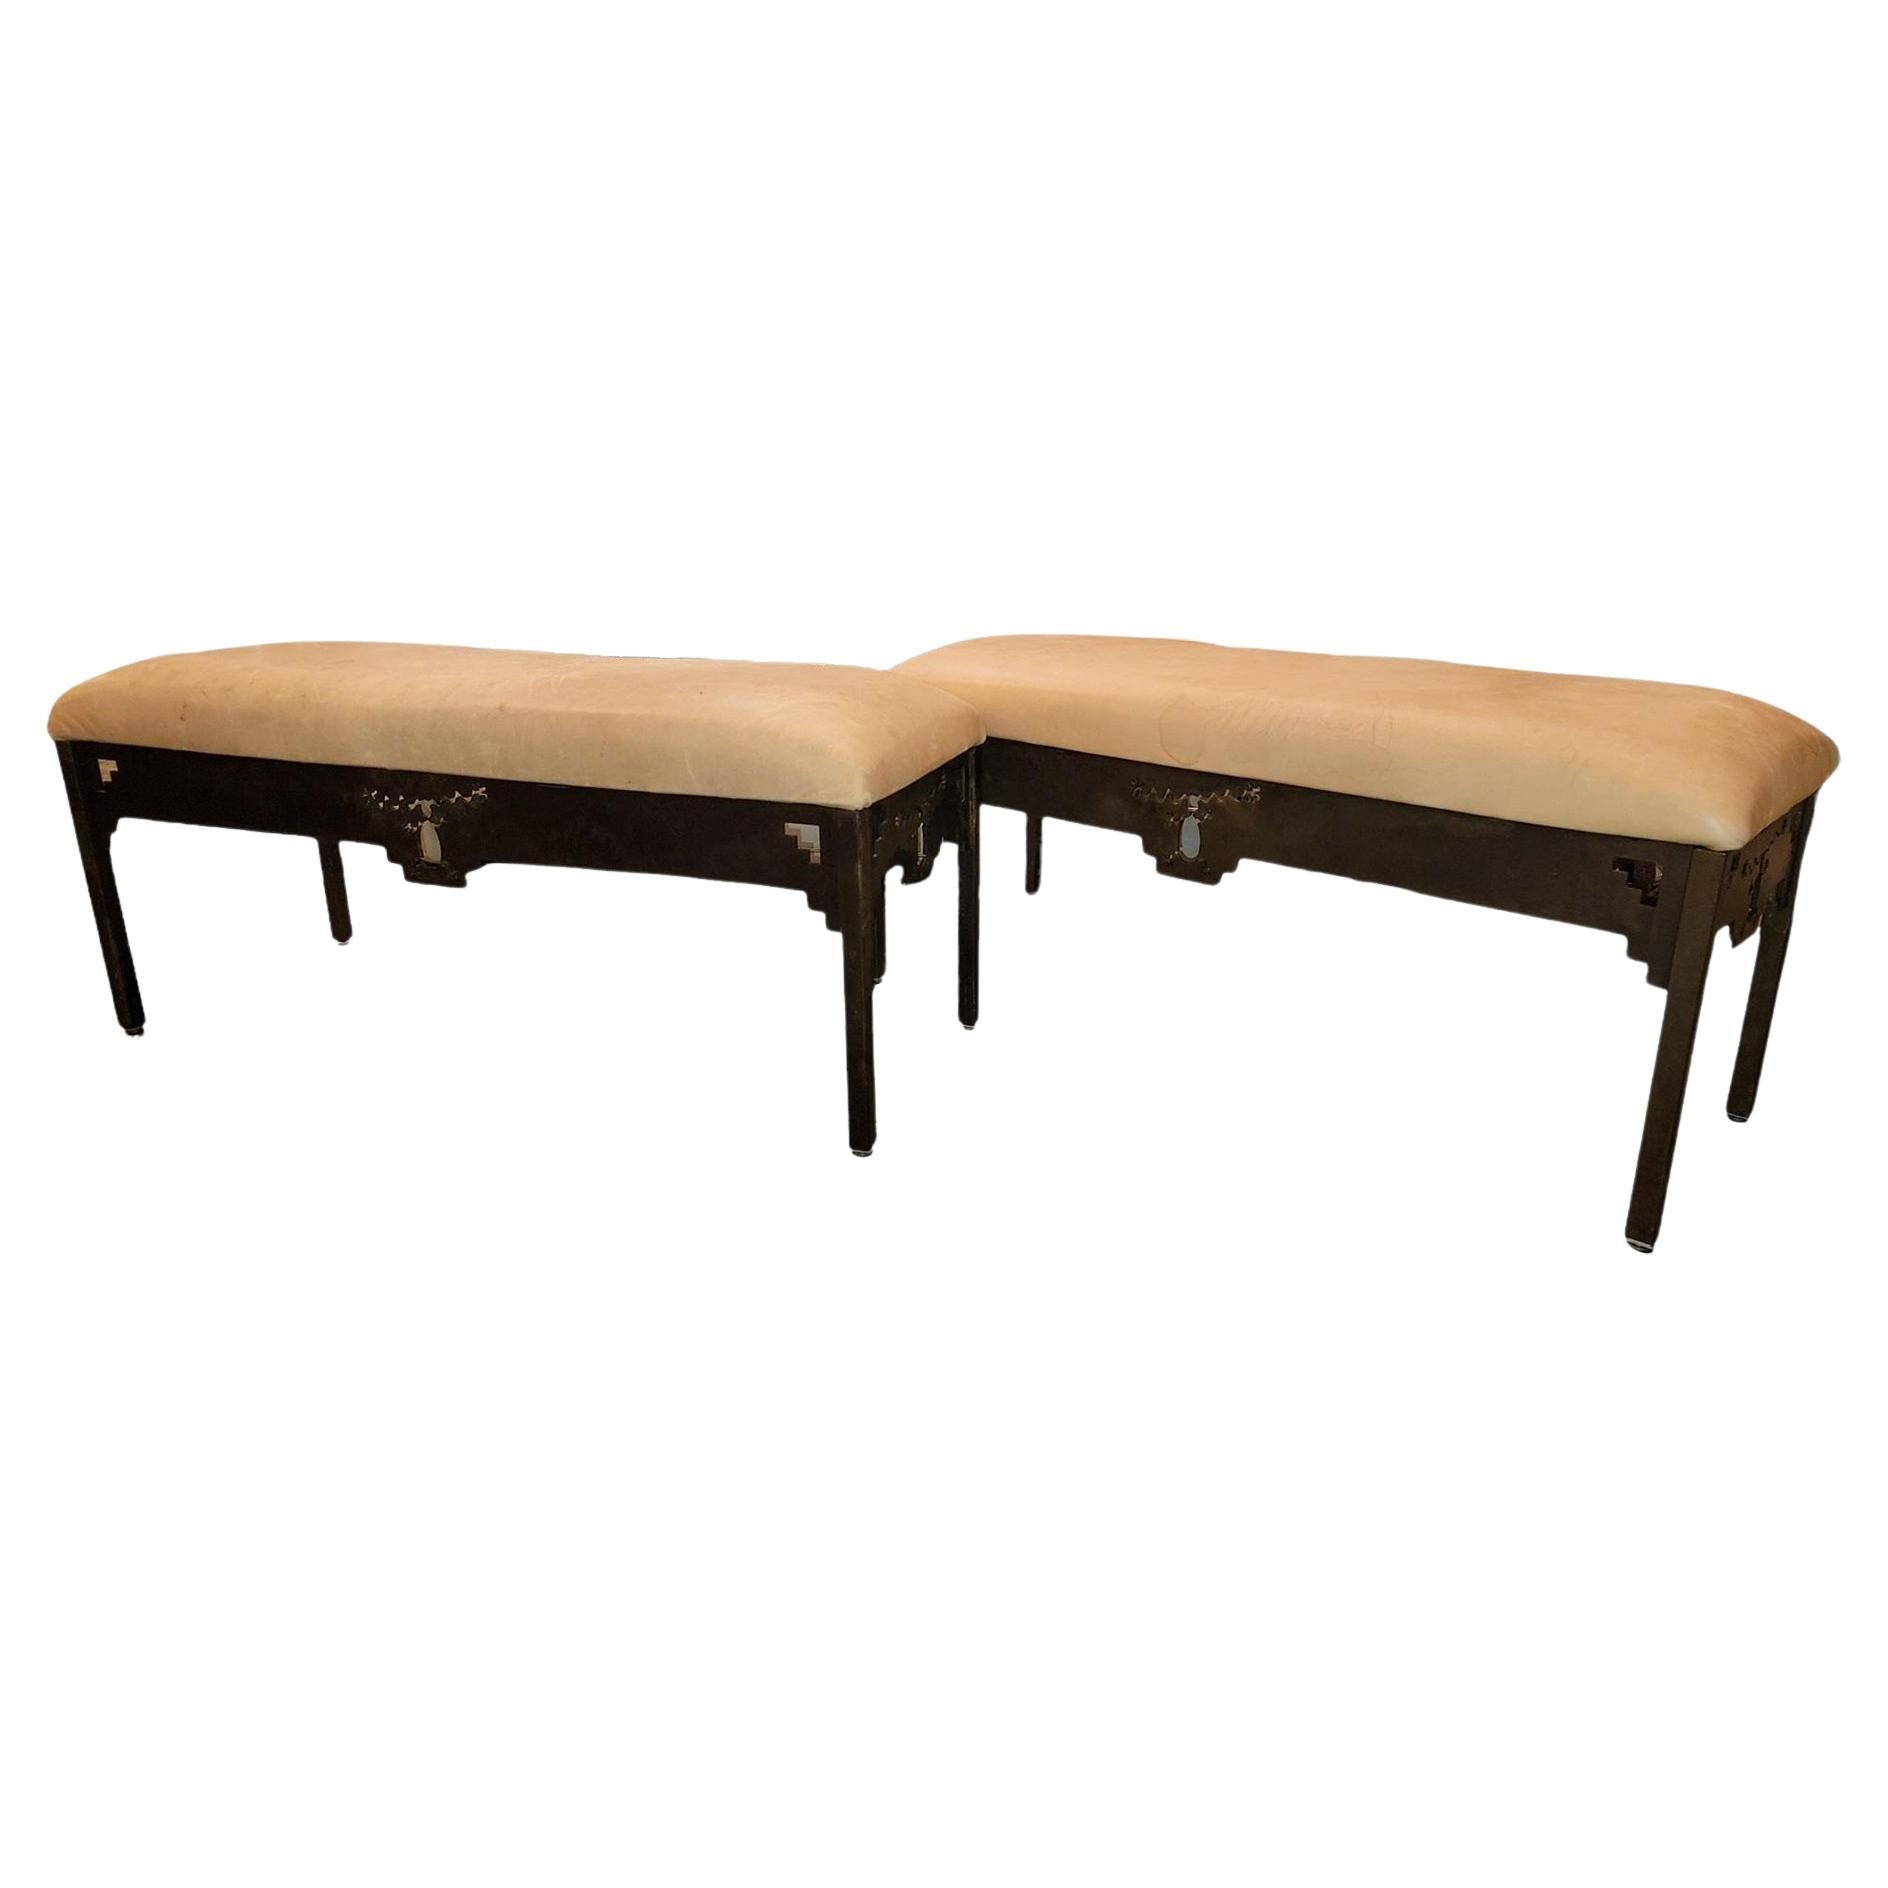 1980s Vintage Iron and Leather Benches with Cut Out Motifs - a Pair For Sale